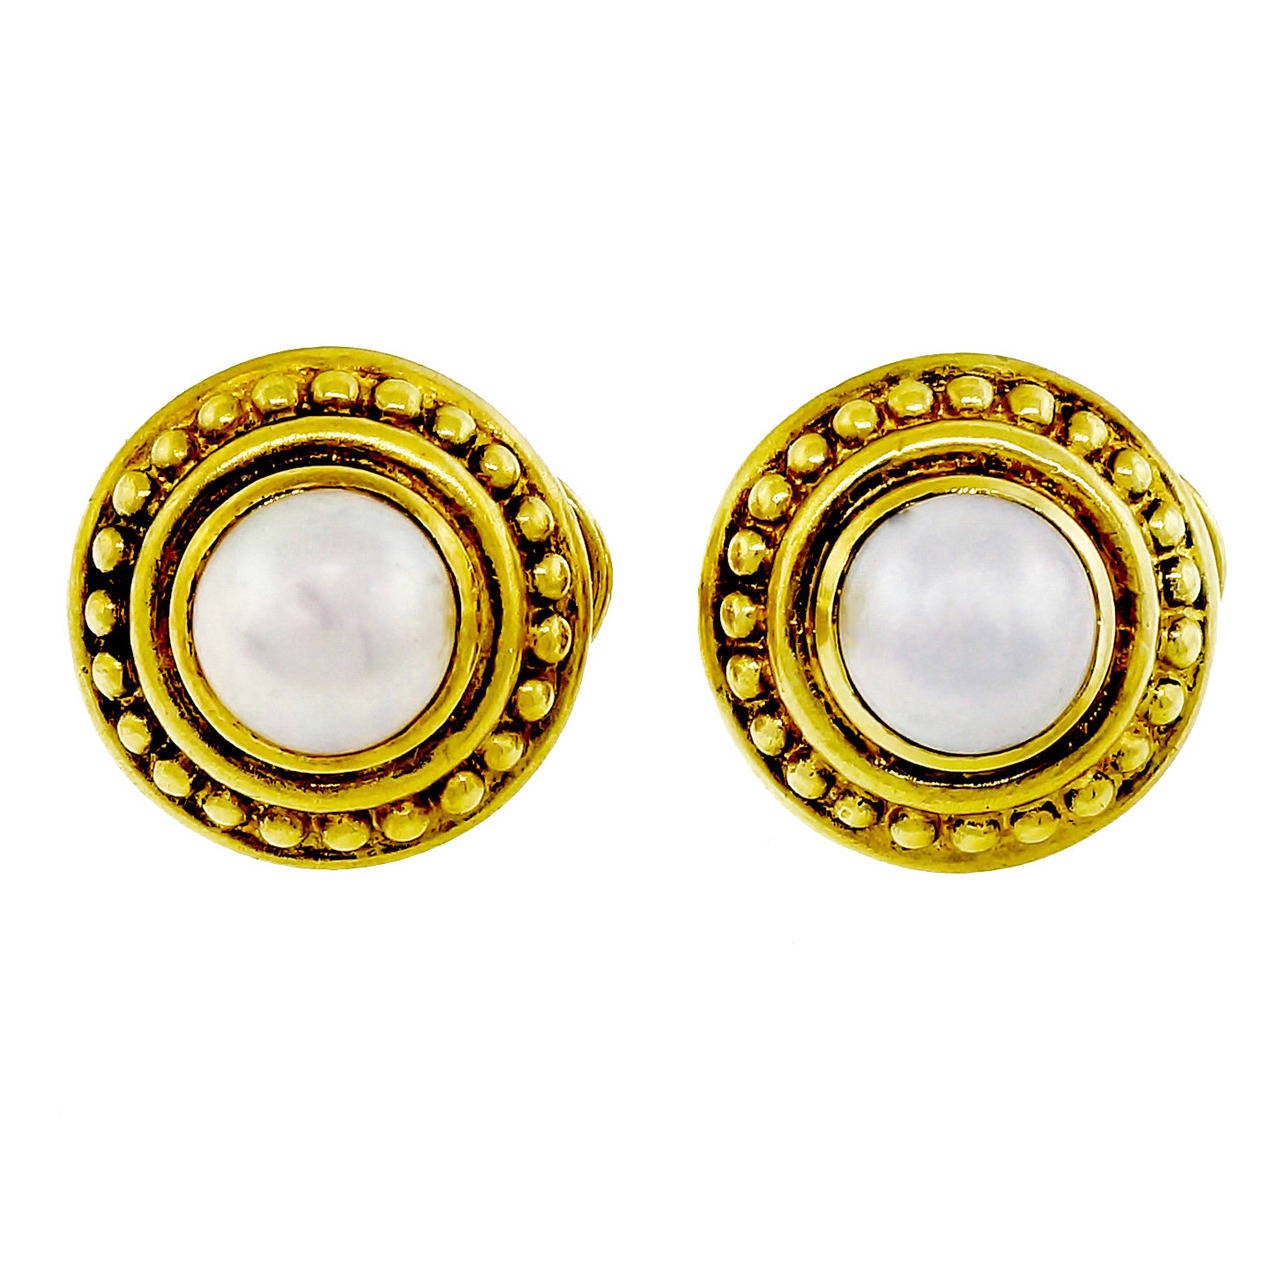 Judith Ripka Mabe Pearl Gold Earrings For Sale at 1stdibs